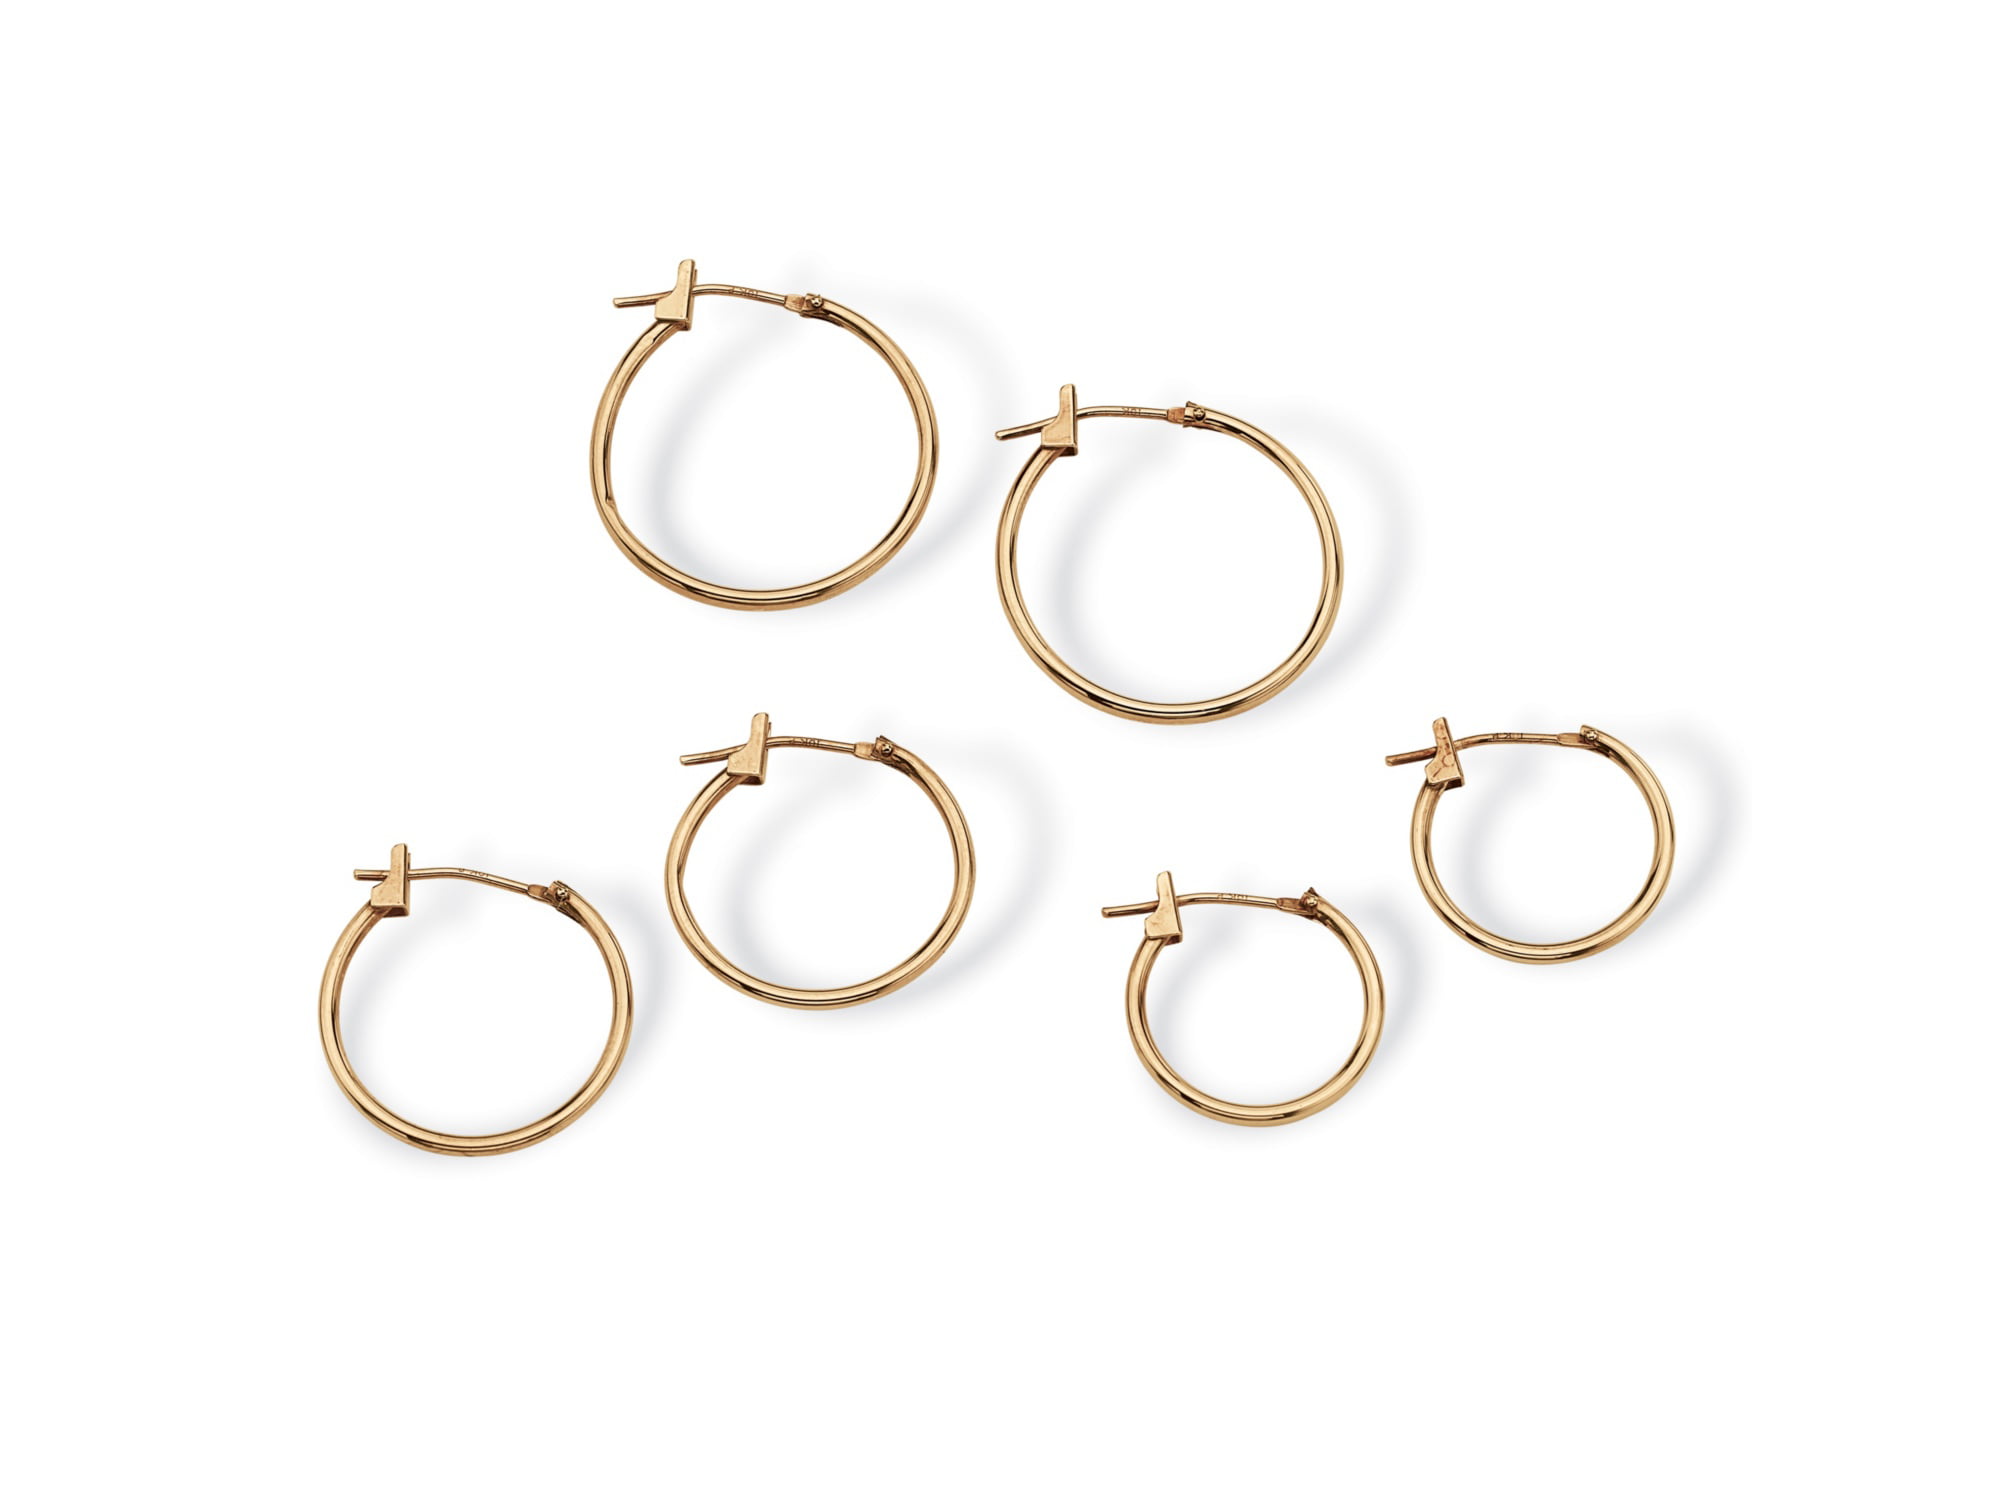 ALEX AND ELSA 18K Gold Plated 3 Color Oval Hoop Earrings 40mm #1 